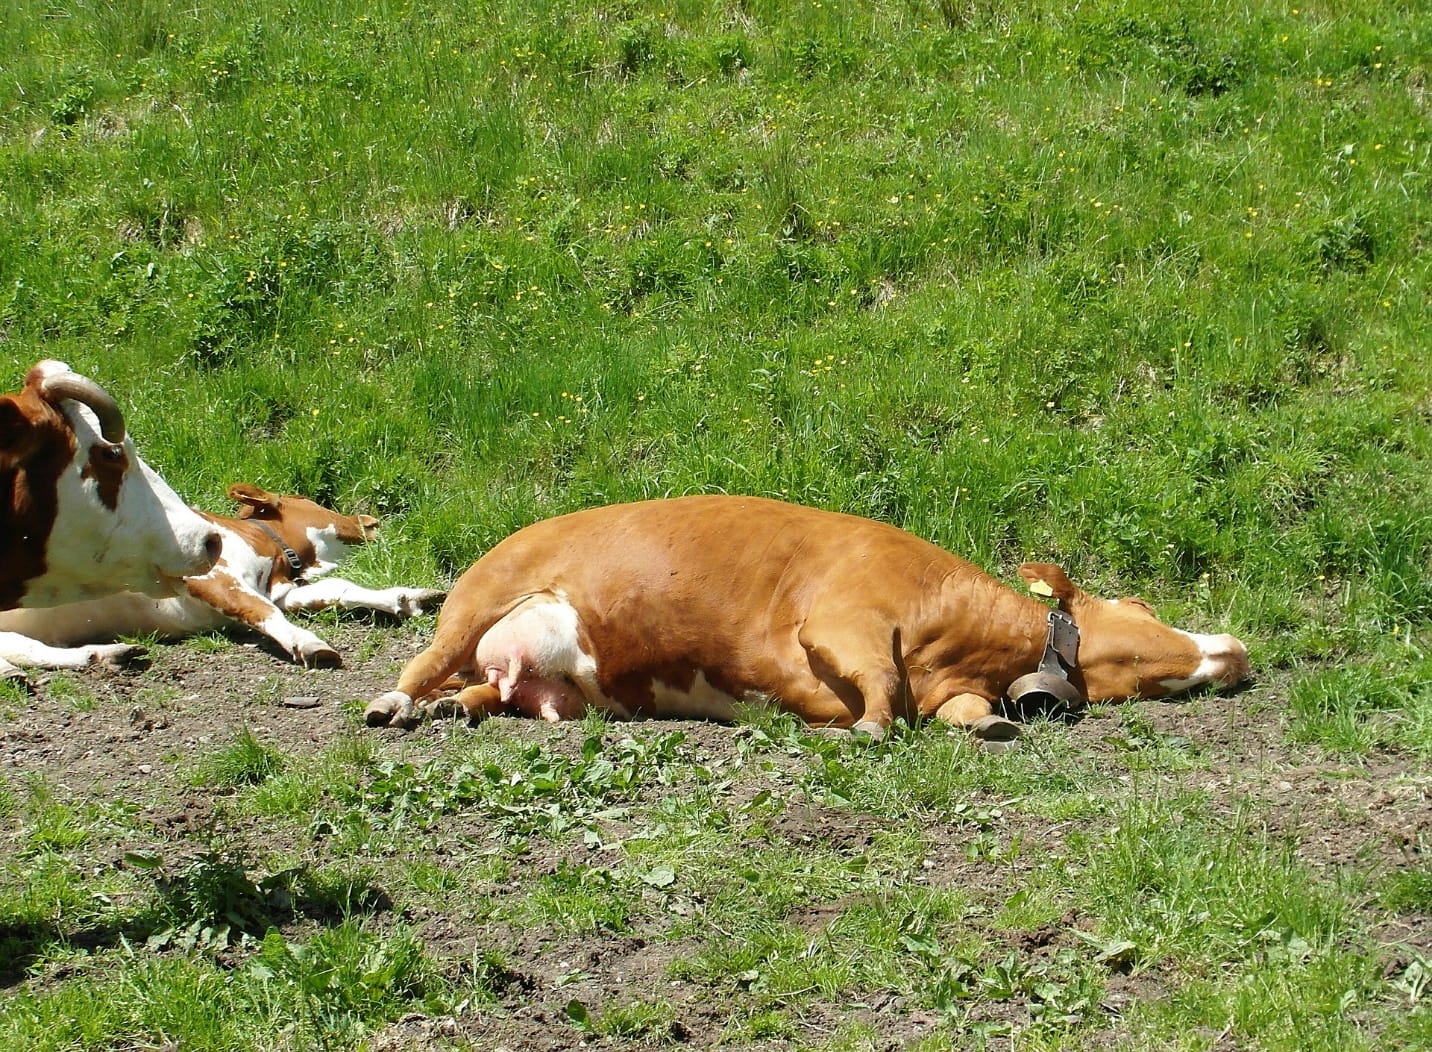 Cows that have been affected by a heat stroke usually lie down on the ground and are unable to get up.